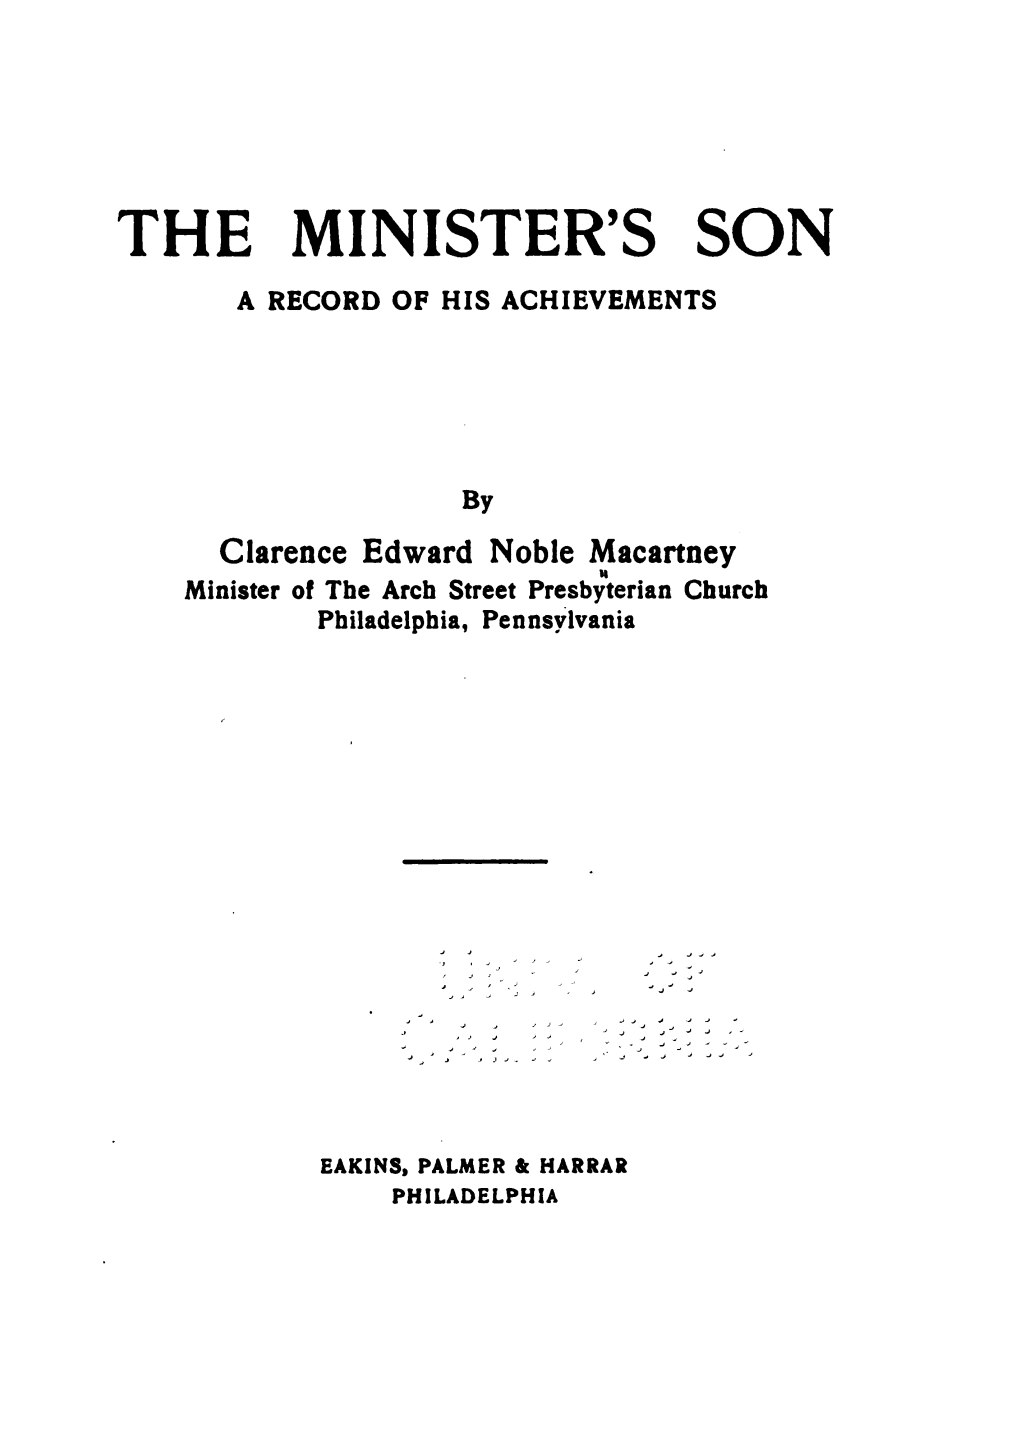 The Minister's Son a Record of His Achievements